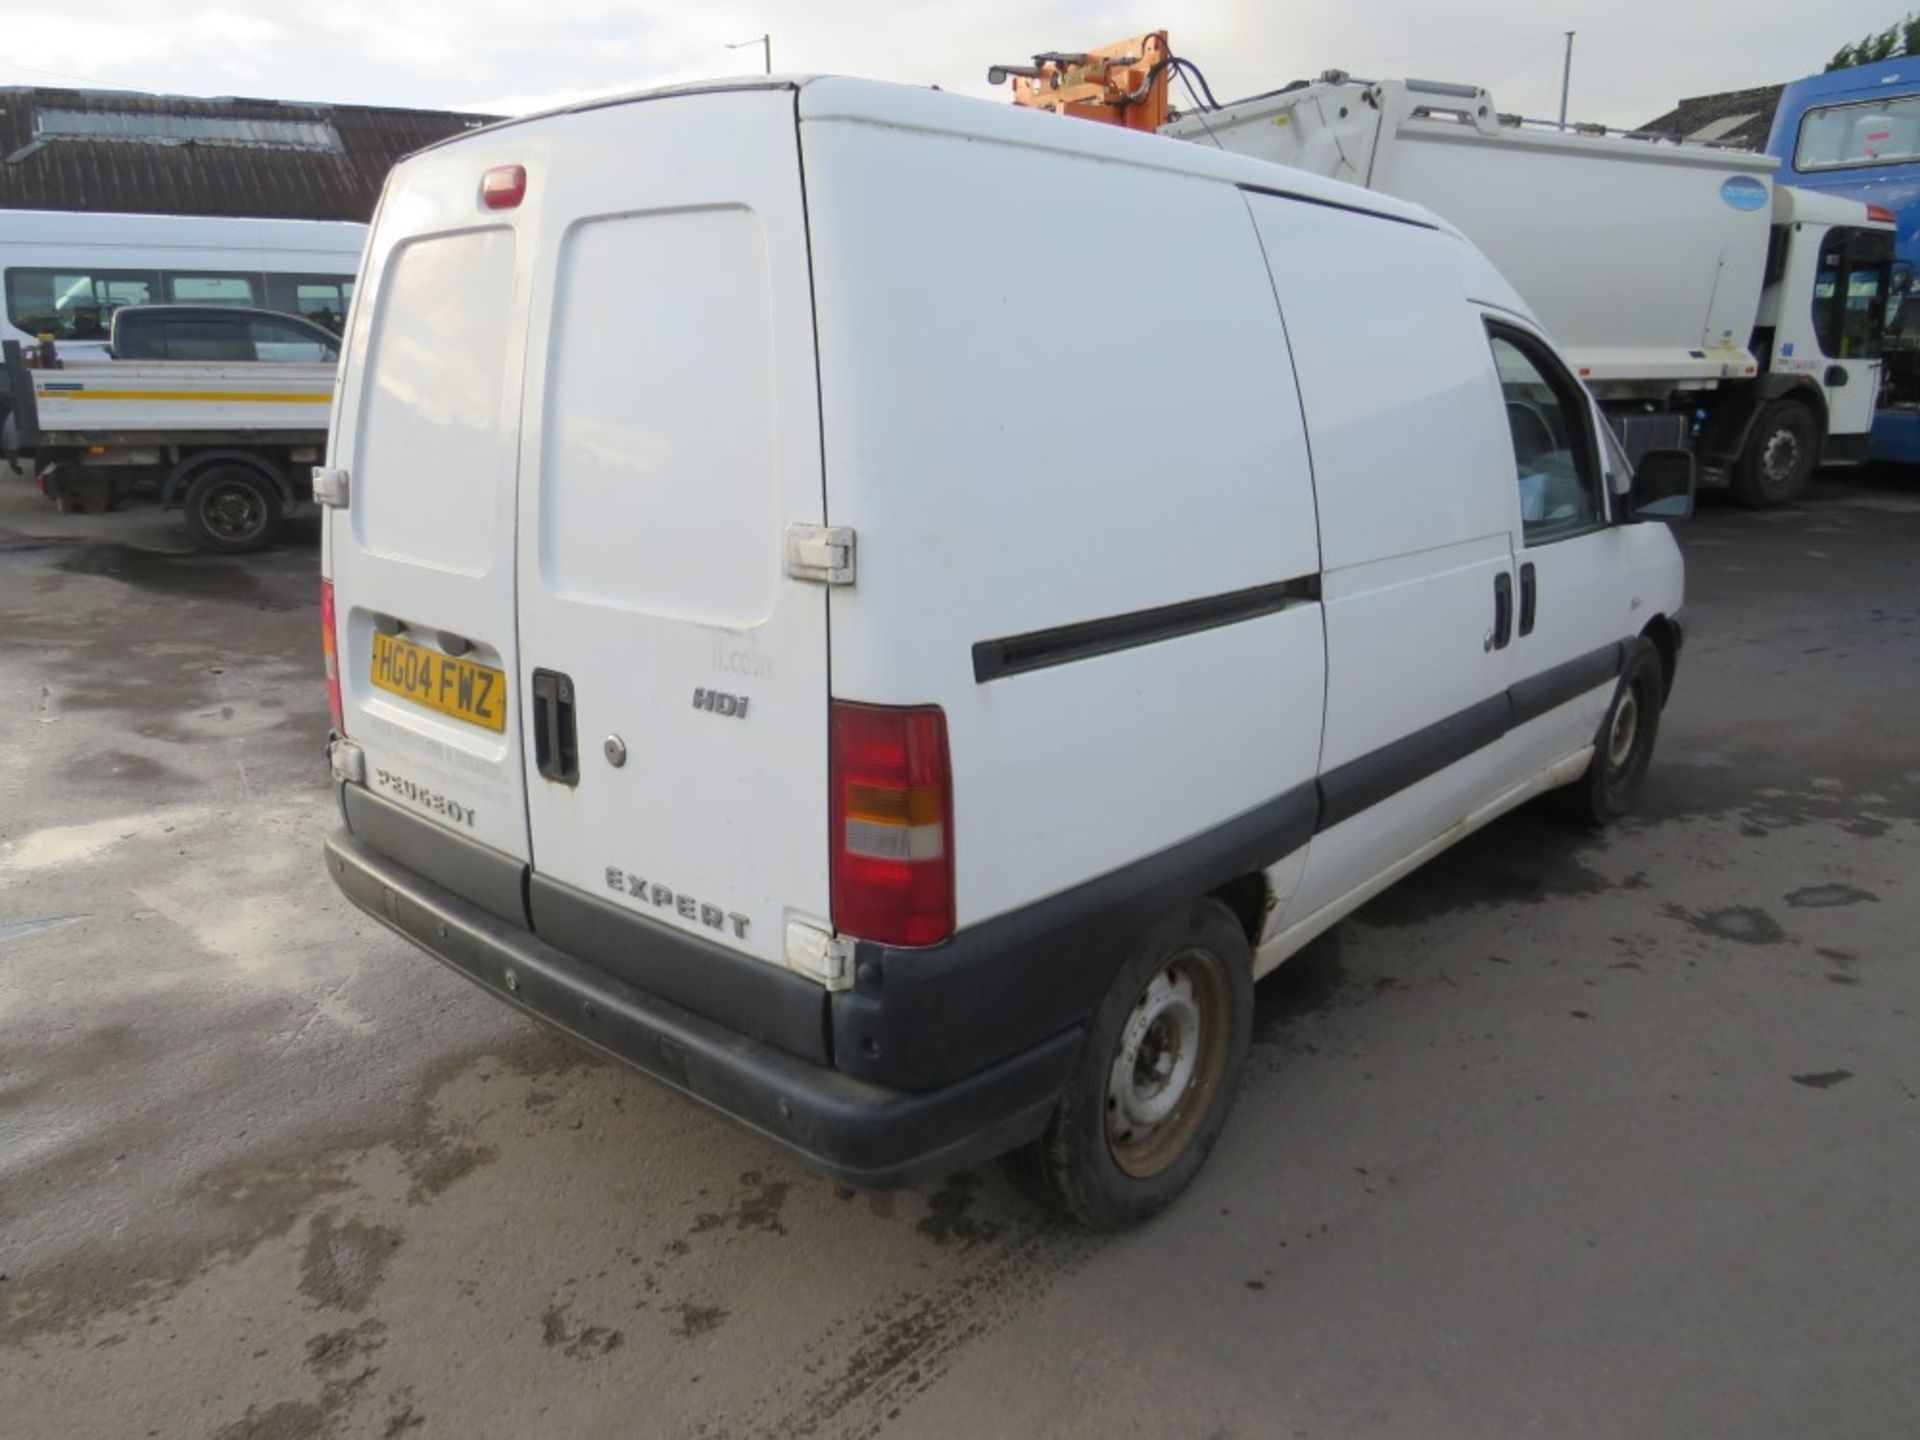 04 reg PEUGEOT EXPERT 900 HDI, 1ST REG 03/04, 164424M NOT WARRANTED, V5 HERE, 8 FORMER KEEPERS [+ - Image 4 of 6